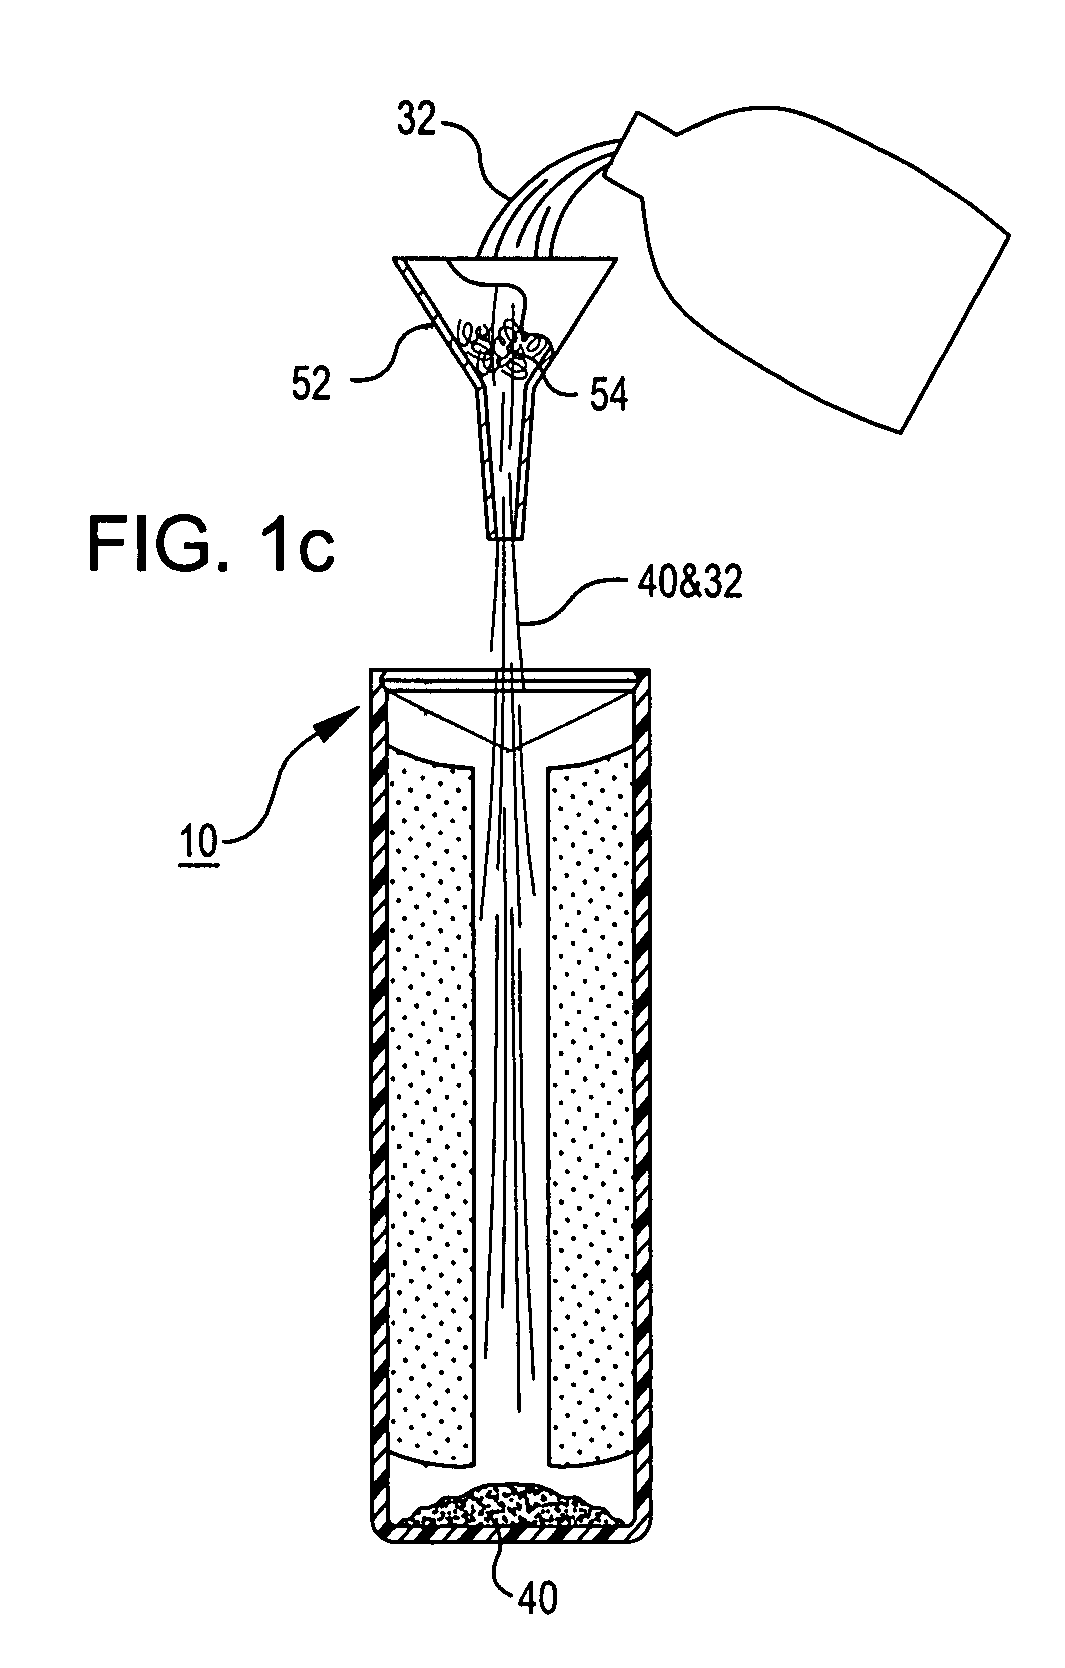 Forward osmosis utilizing a controllable osmotic agent